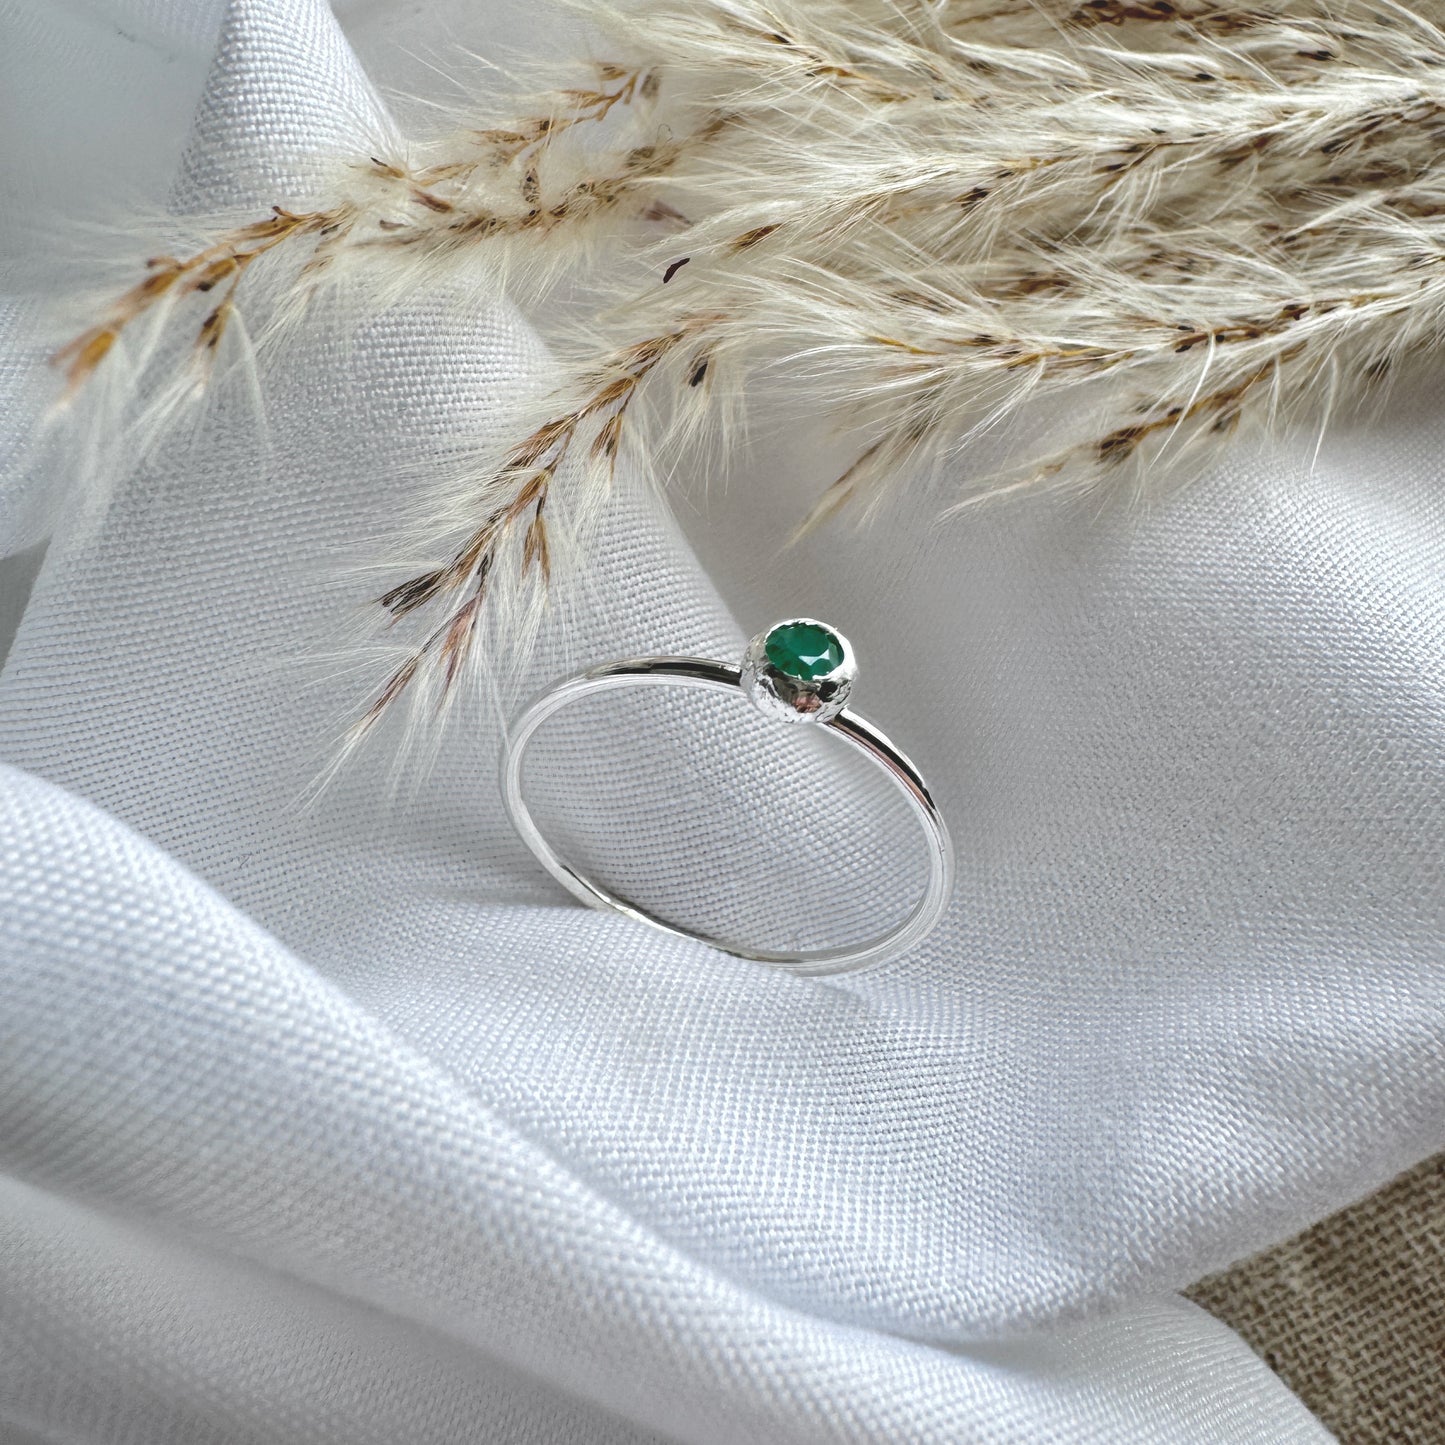 Emerald & Silver Ring - 3mm